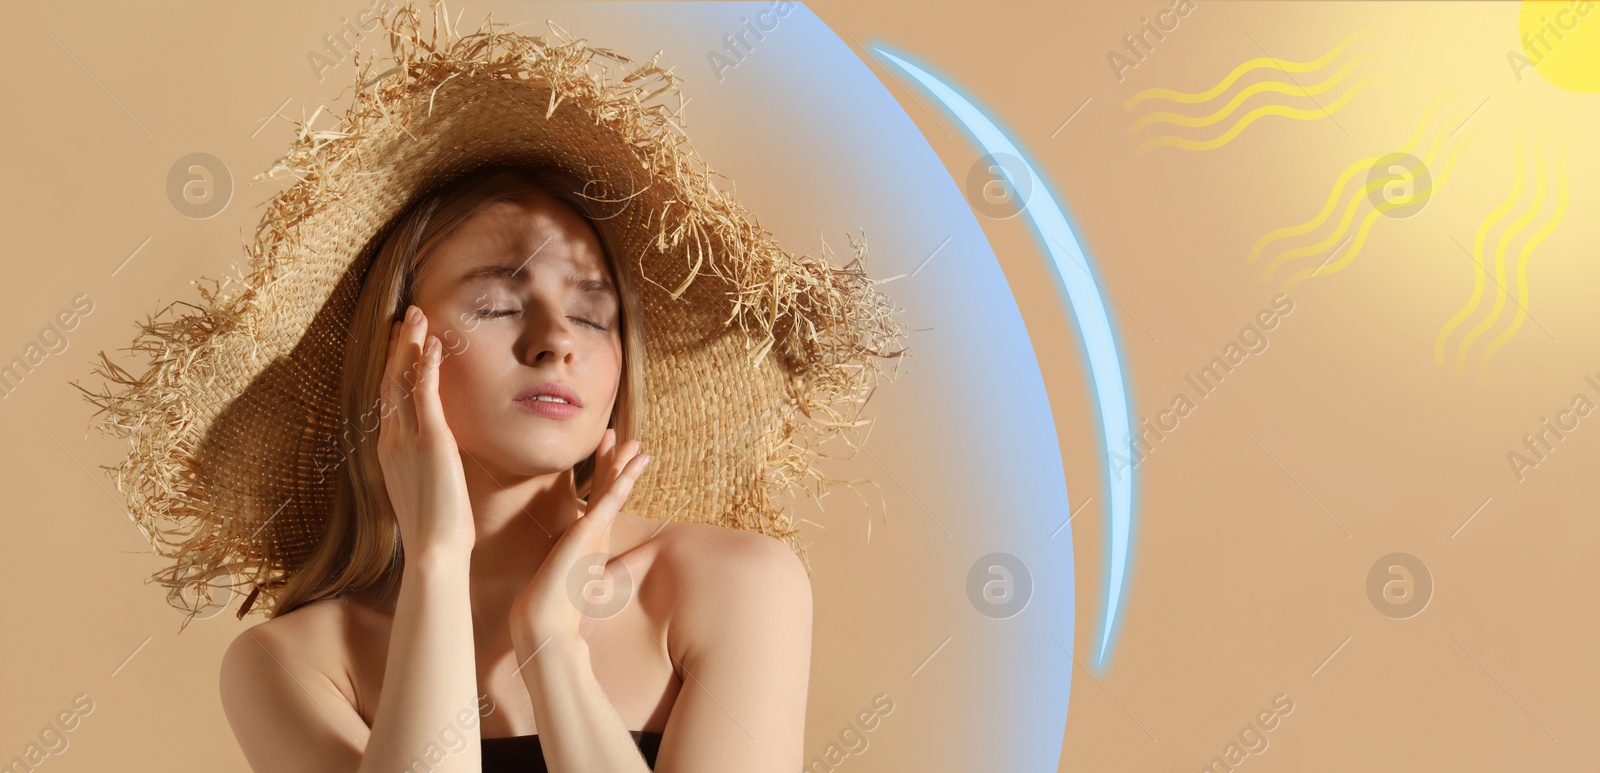 Image of Sun protection product (sunscreen) as barrier against ultraviolet, banner design. Beautiful young woman in straw hat on beige background